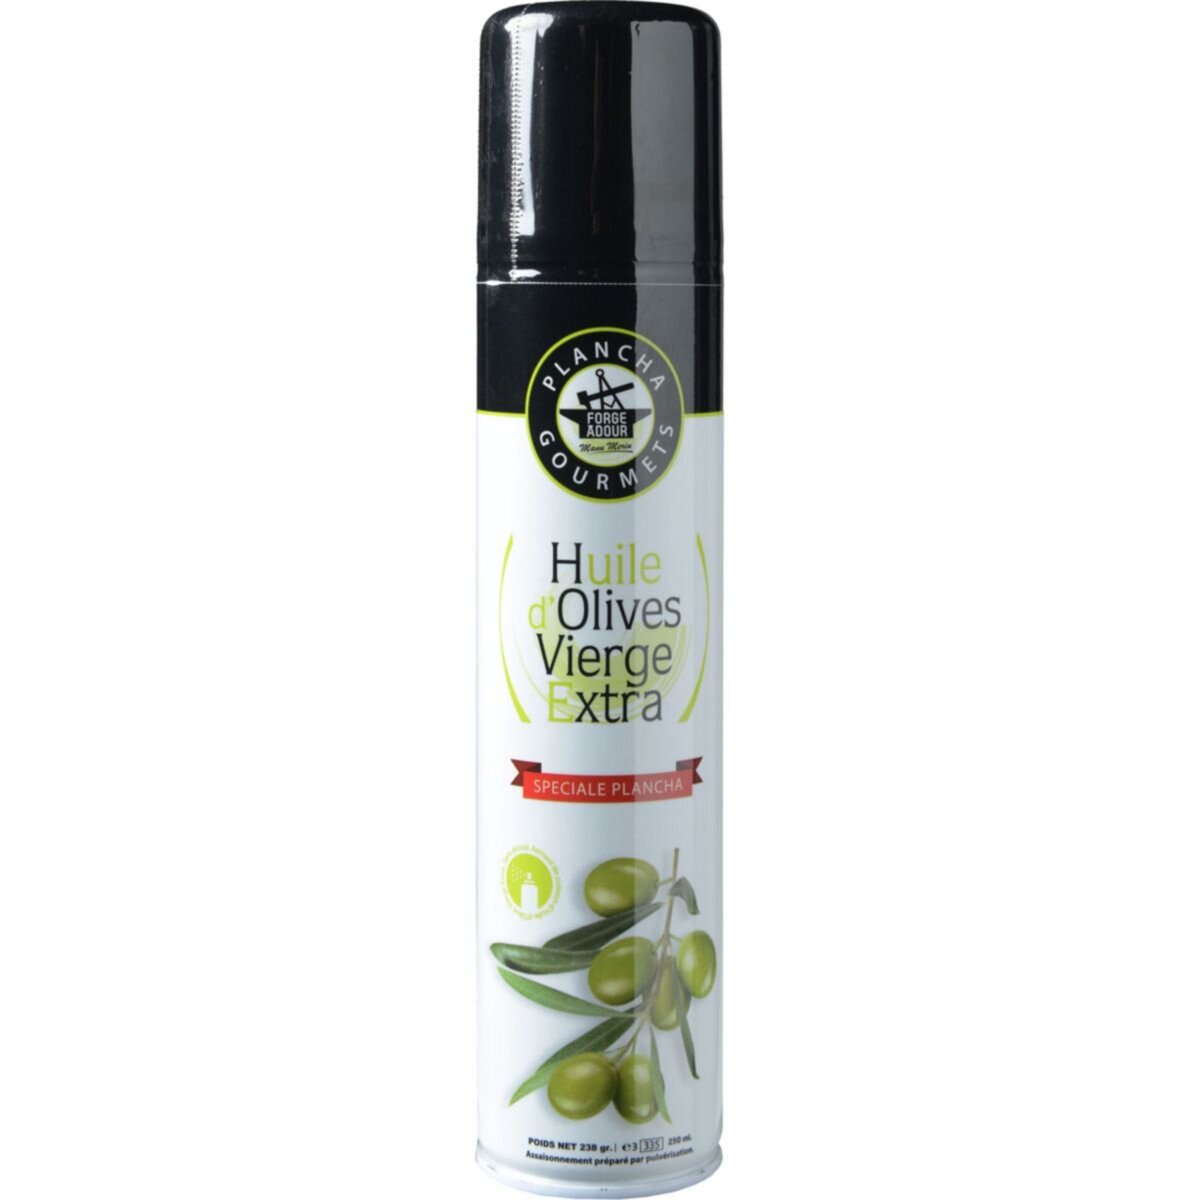 AUCHAN MMM! Huile d'olive vierge extra en spray 25cl pas cher